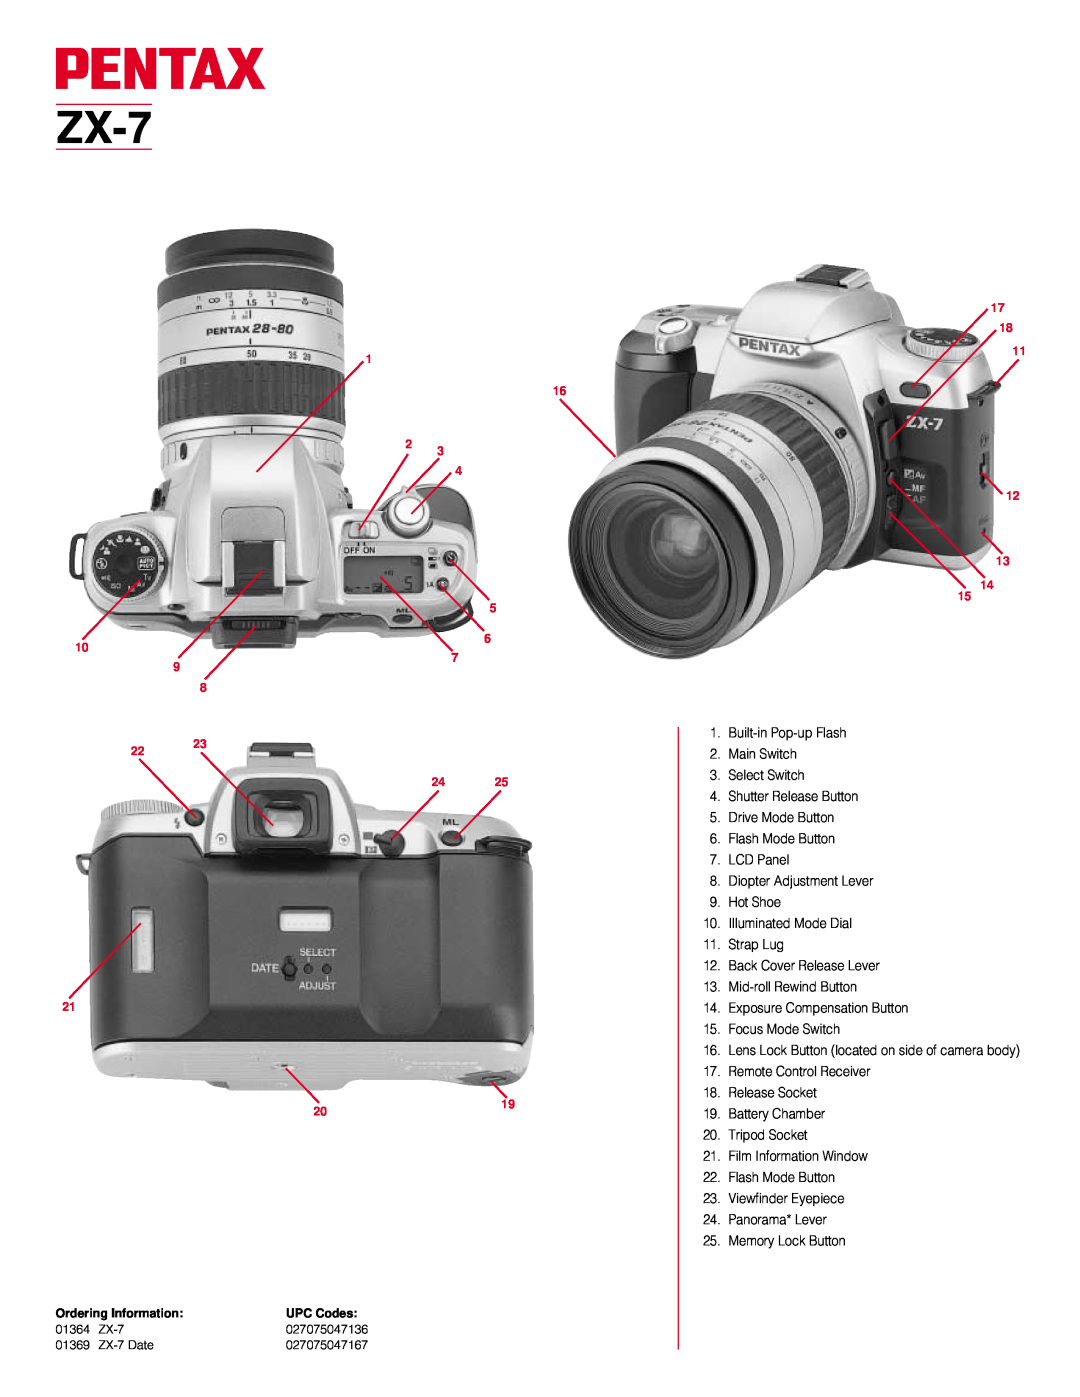 Pentax SMART ZX-7 Diopter Adjustment Lever, Back Cover Release Lever, Lens Lock Button located on side of camera body 